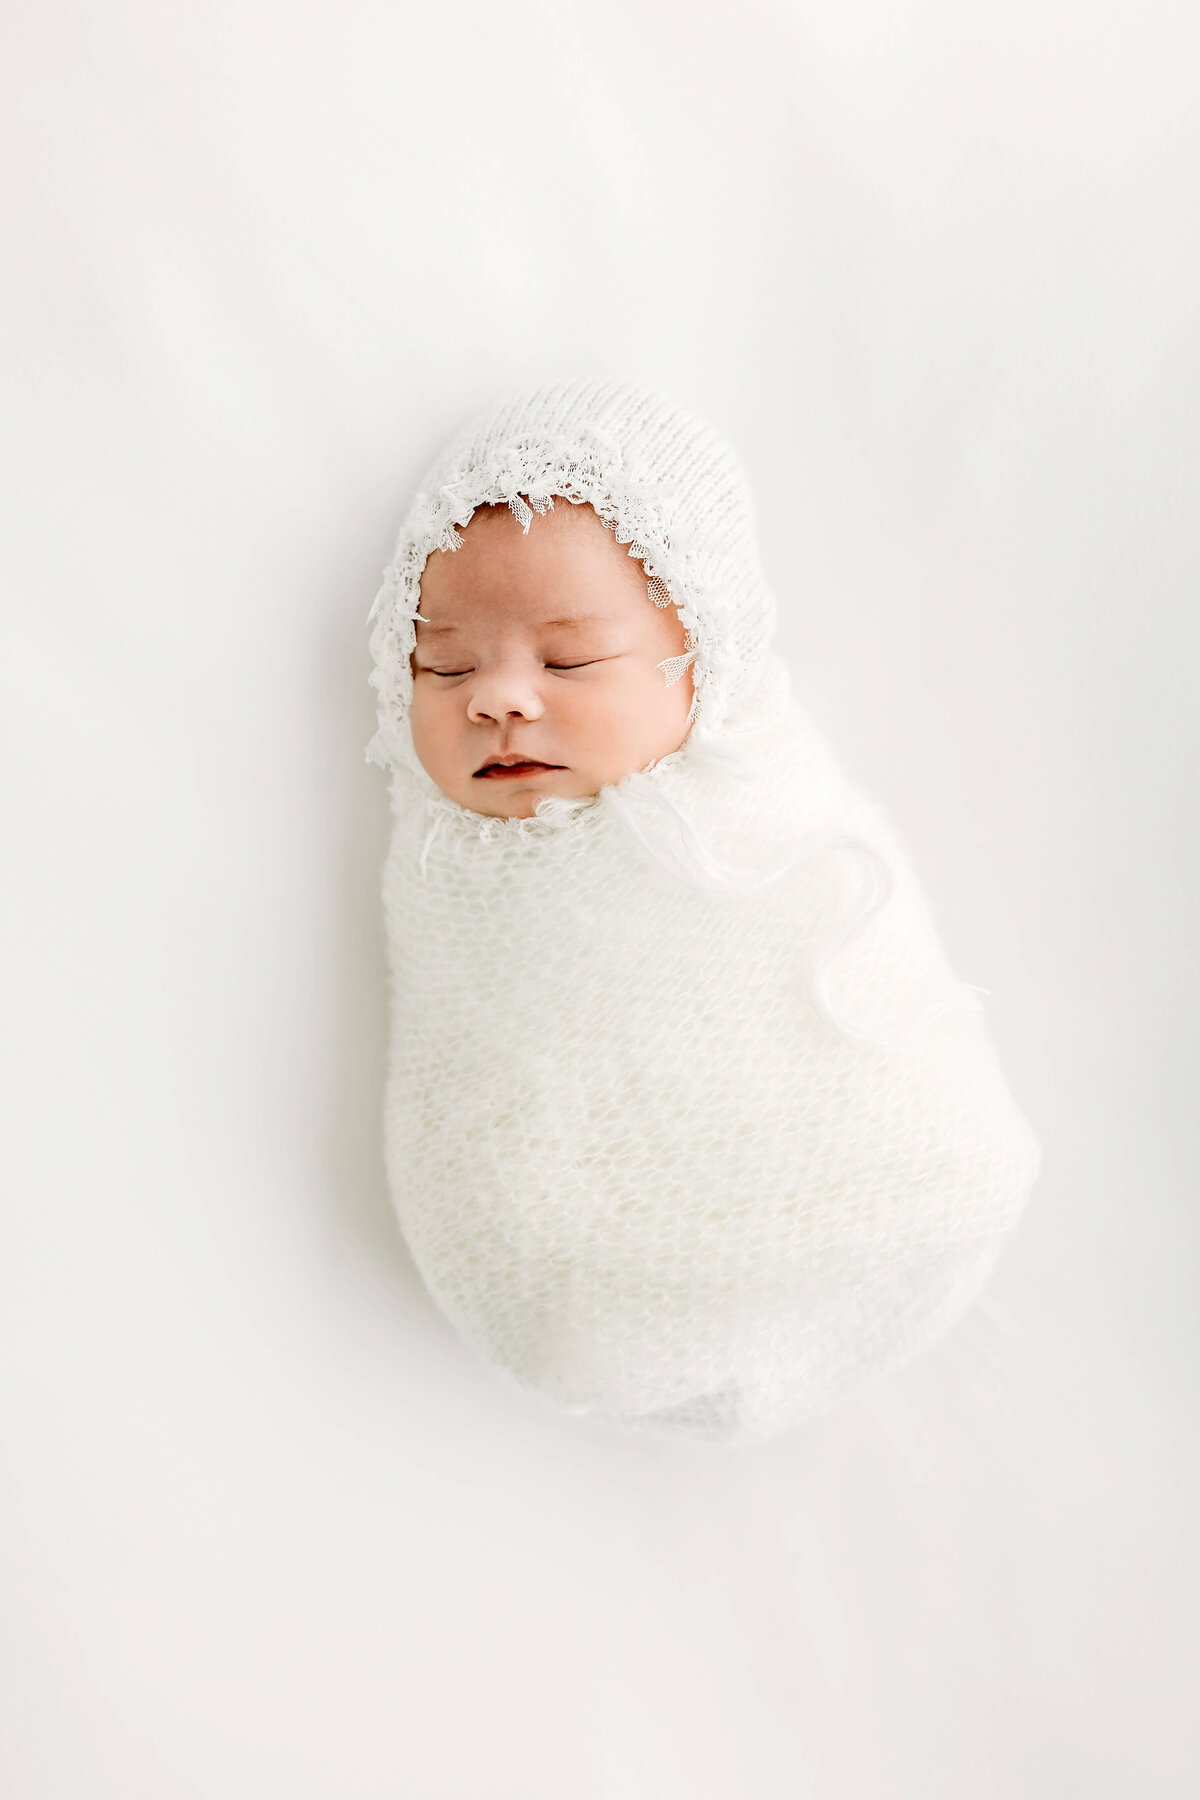 All white background and newborn baby in bonnet near Eau Claire, WI by Luci Levon Photography